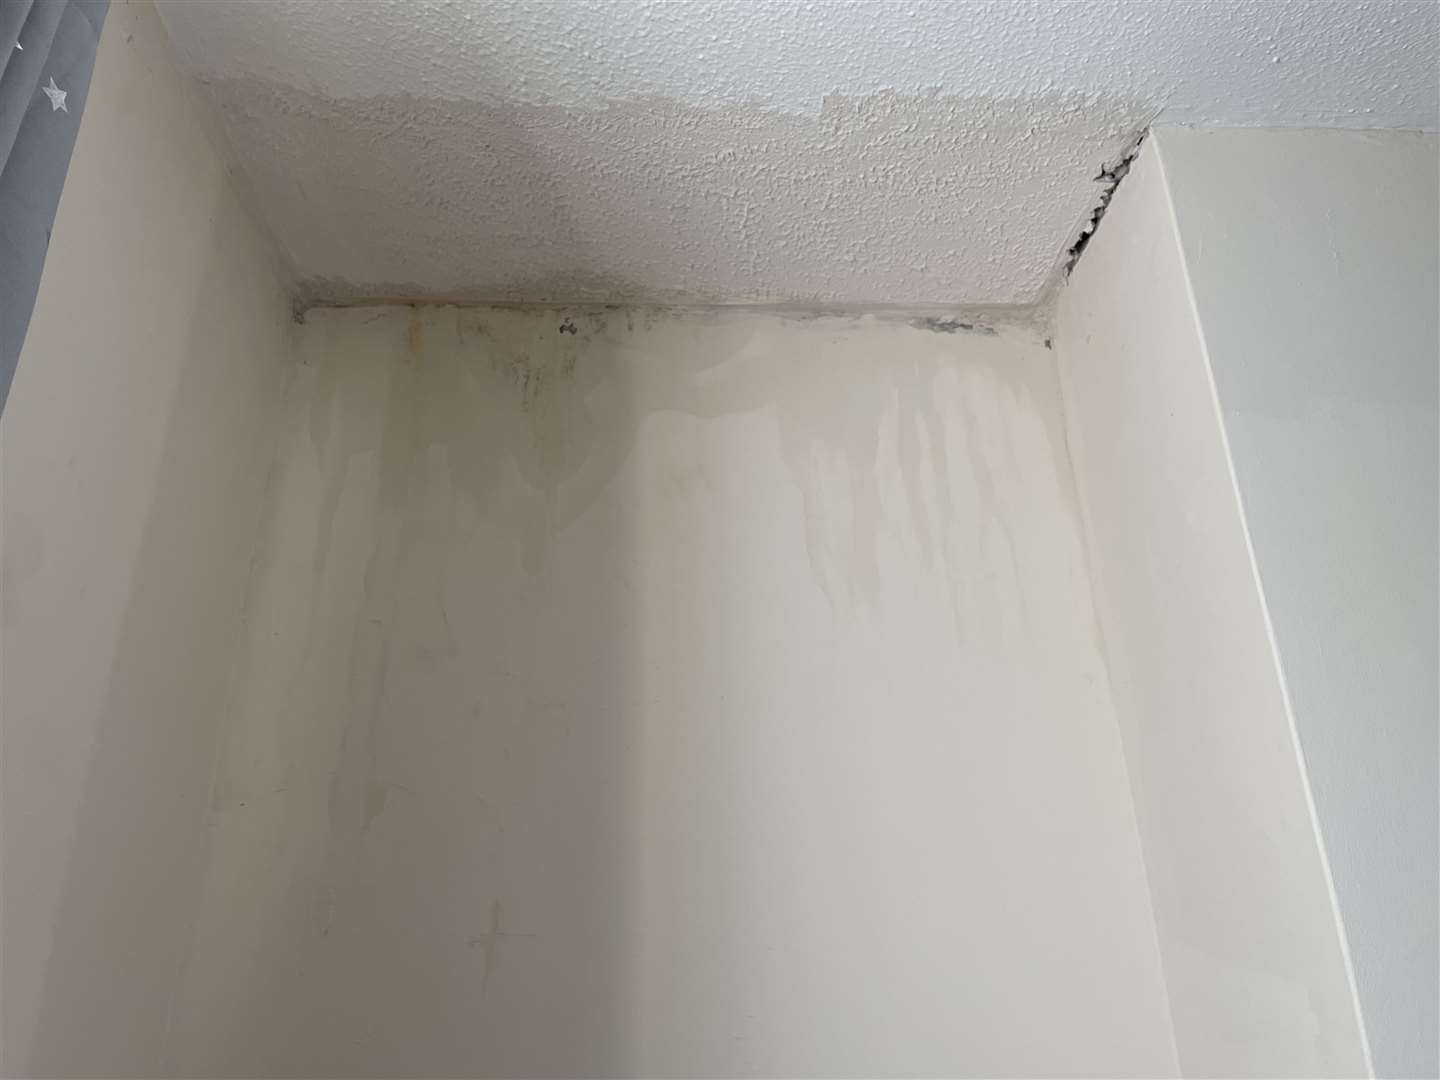 Lauren Burford says the ceiling is now coming away from the wall in the Whitstable property